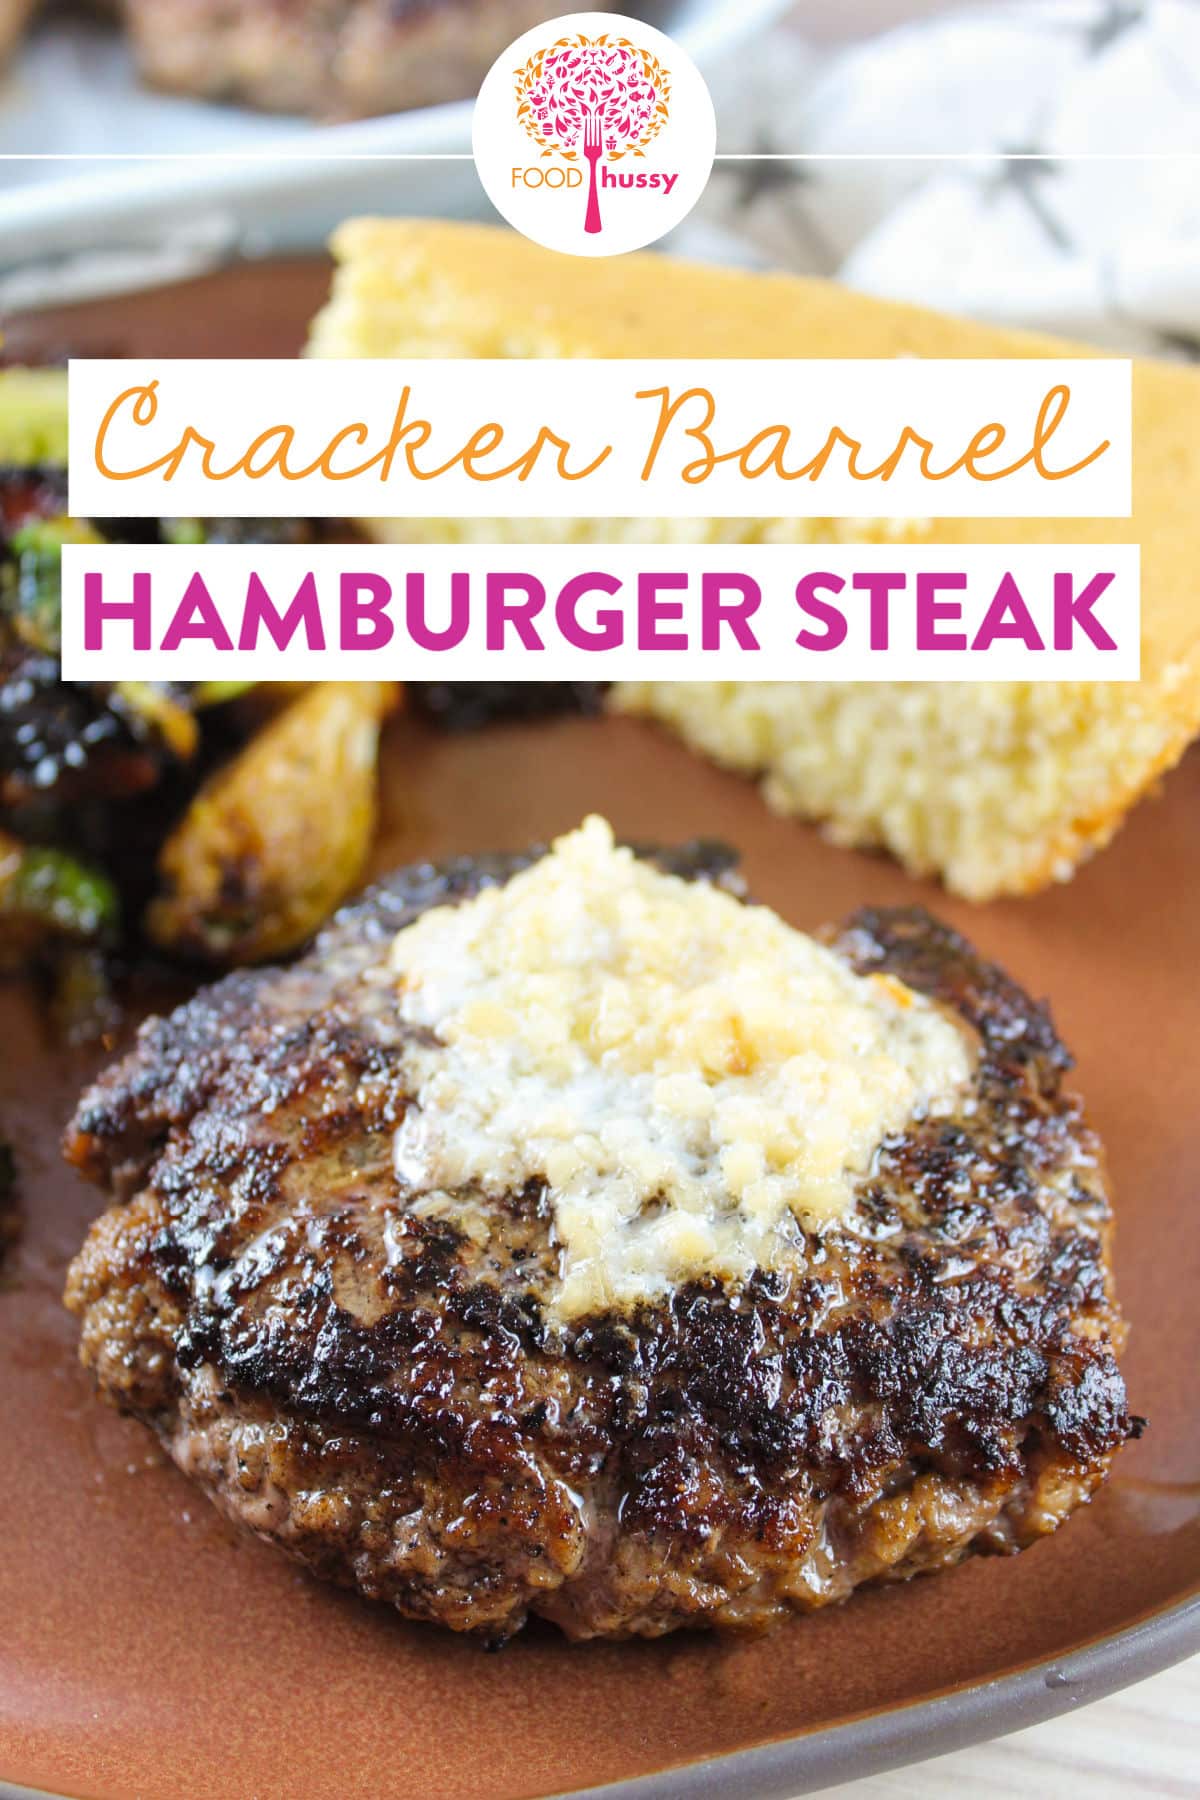 Cracker Barrel Hamburger Steak is a delicious down-home comfort food dish. Half-pound hamburger steak topped with a decadent garlic butter sauce! This is easy and delicious.  via @foodhussy